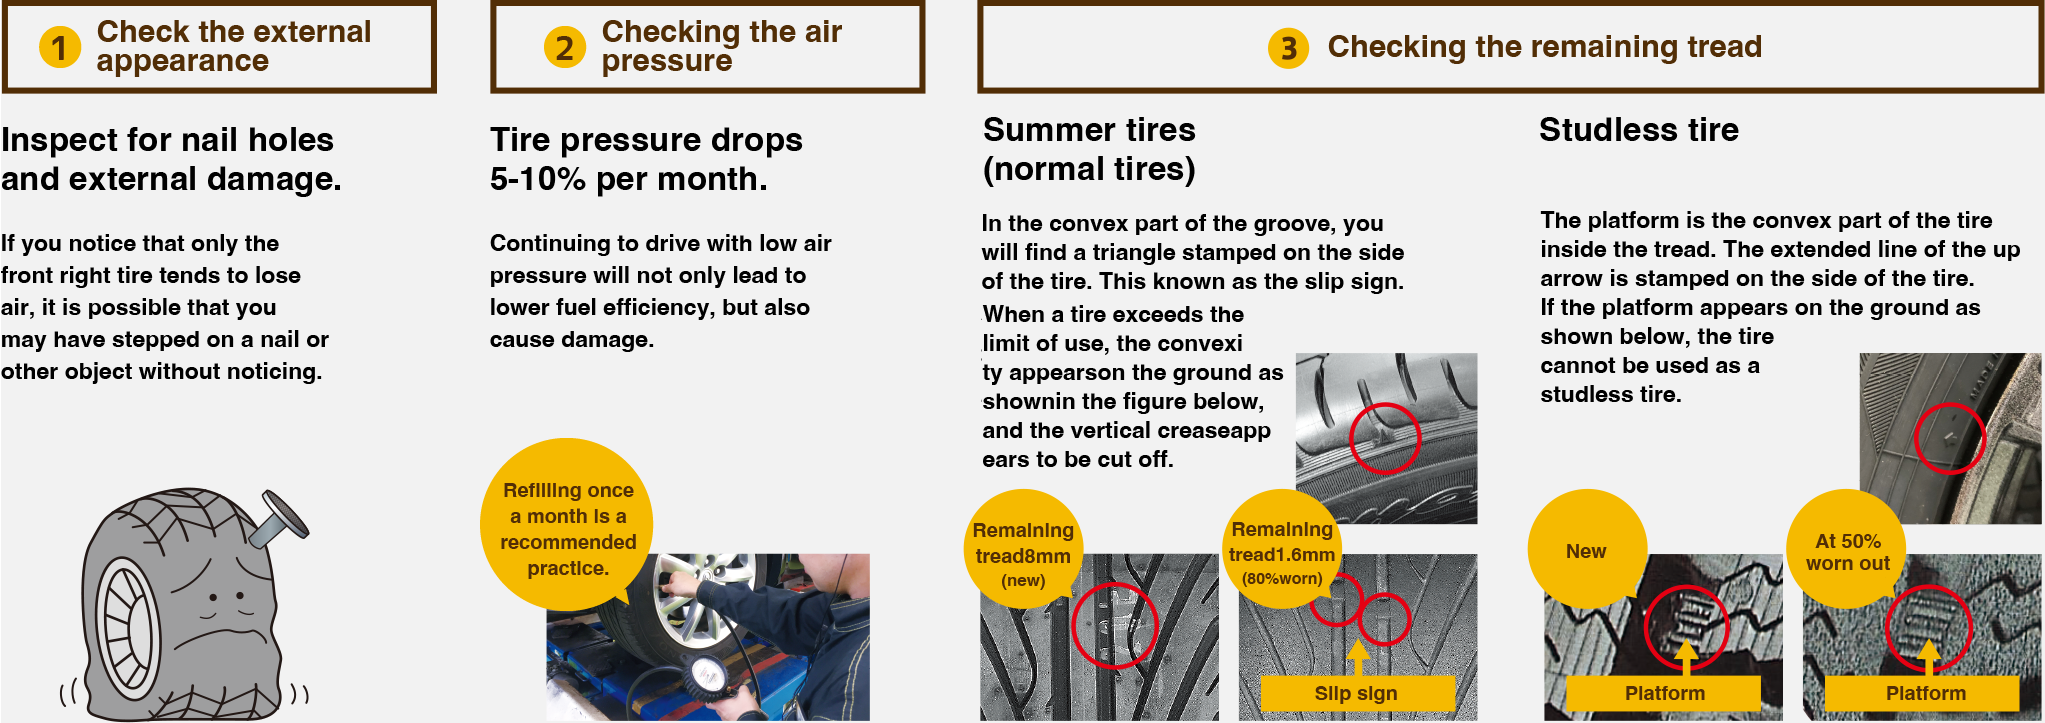 (1) Check the external appearance (2) Checking the air pressure (3) Checking the remaining tread